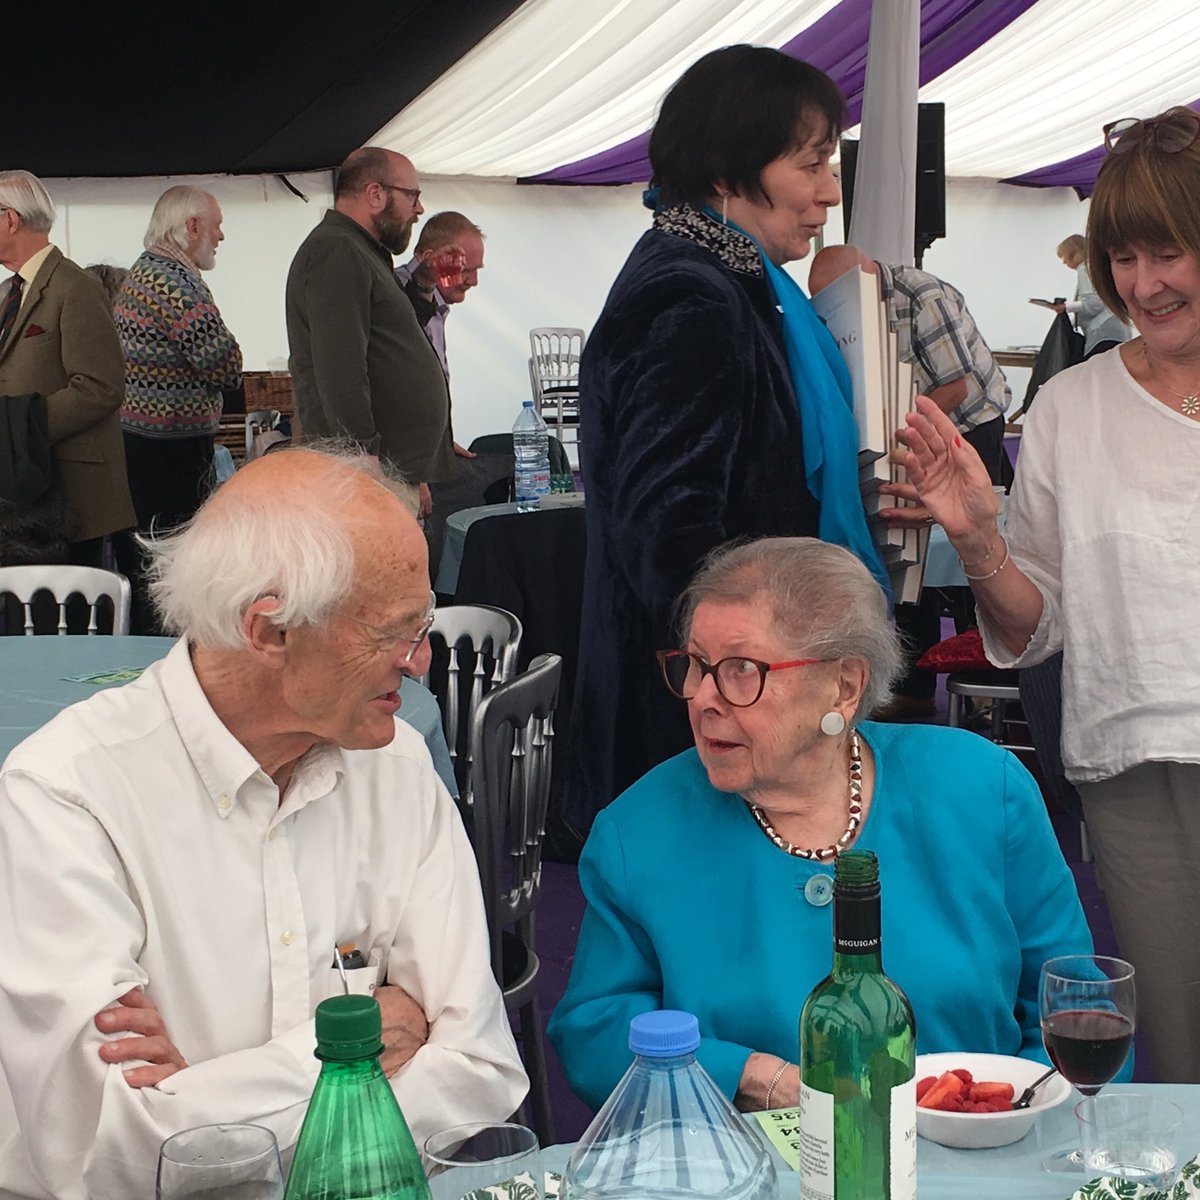 When her memoir was published, she was overjoyed that we got to whizz around to events, meeting some of her own heroes. She was elated to find herself sat at lunch, after an interview with the late Lynn Faulds Wood, next to titans Michael Frayn and Claire Tomalin.